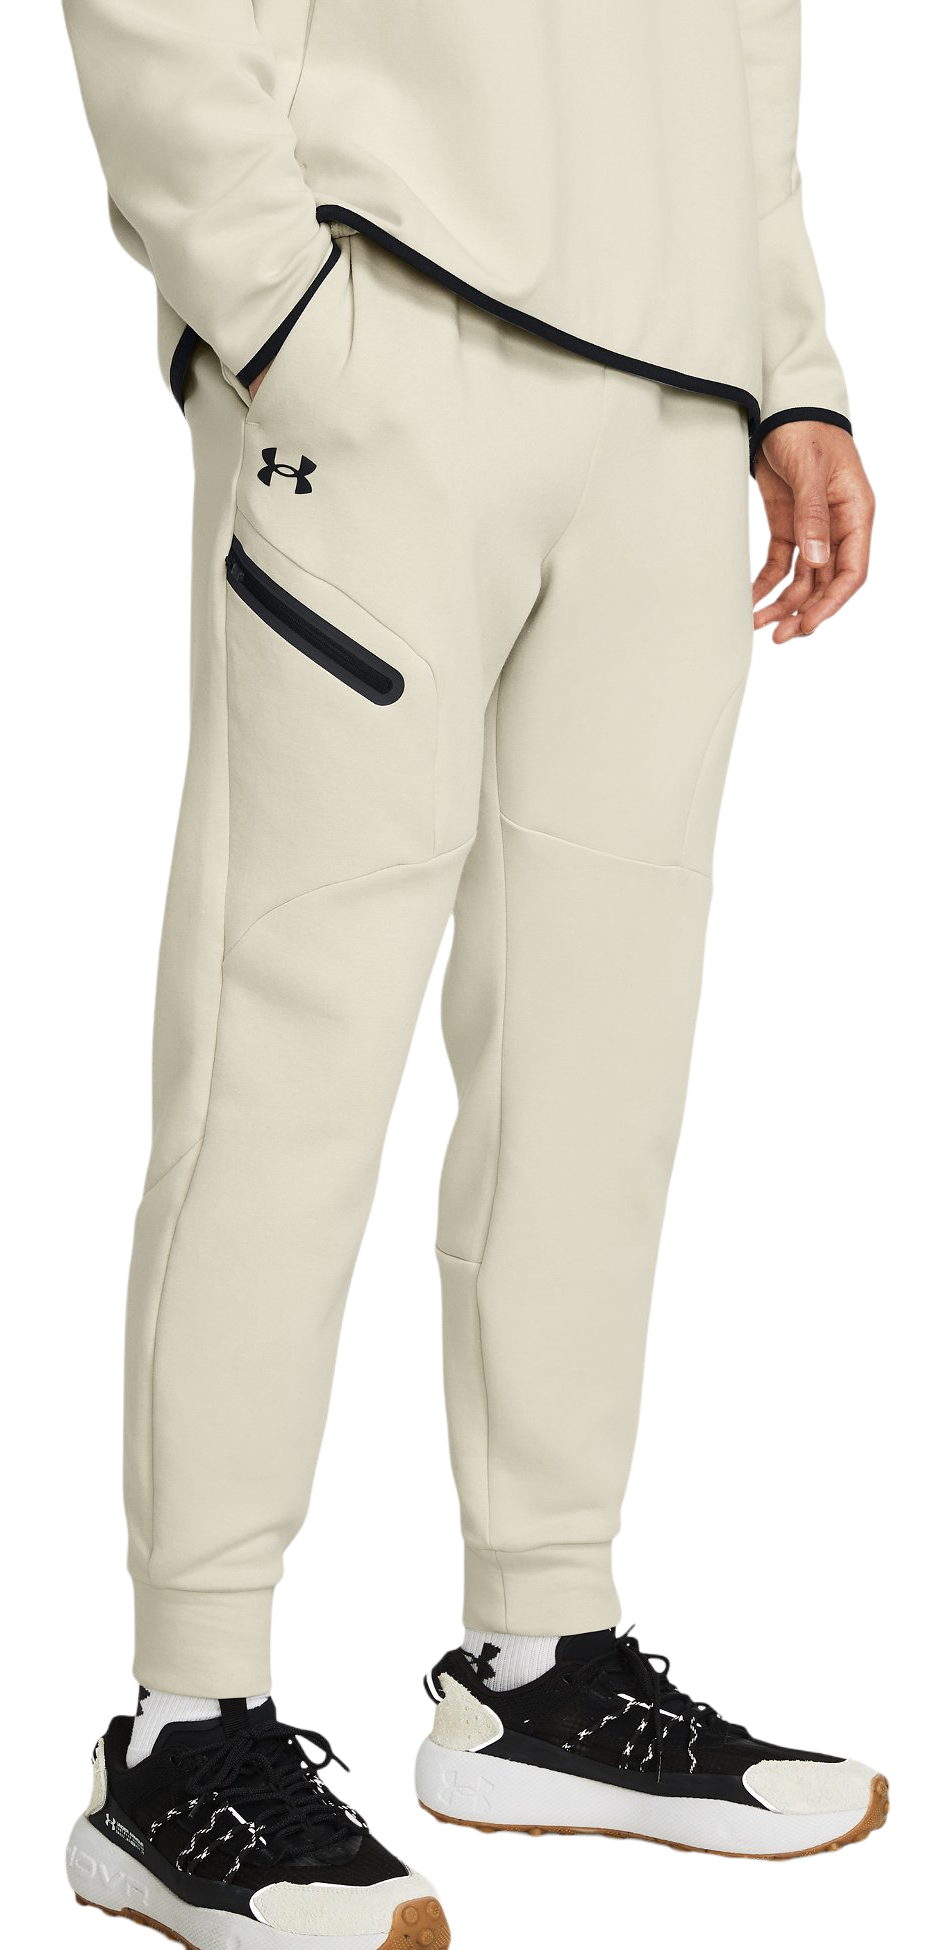 Nohavice Under Armour UA Unstoppable Flc Joggers